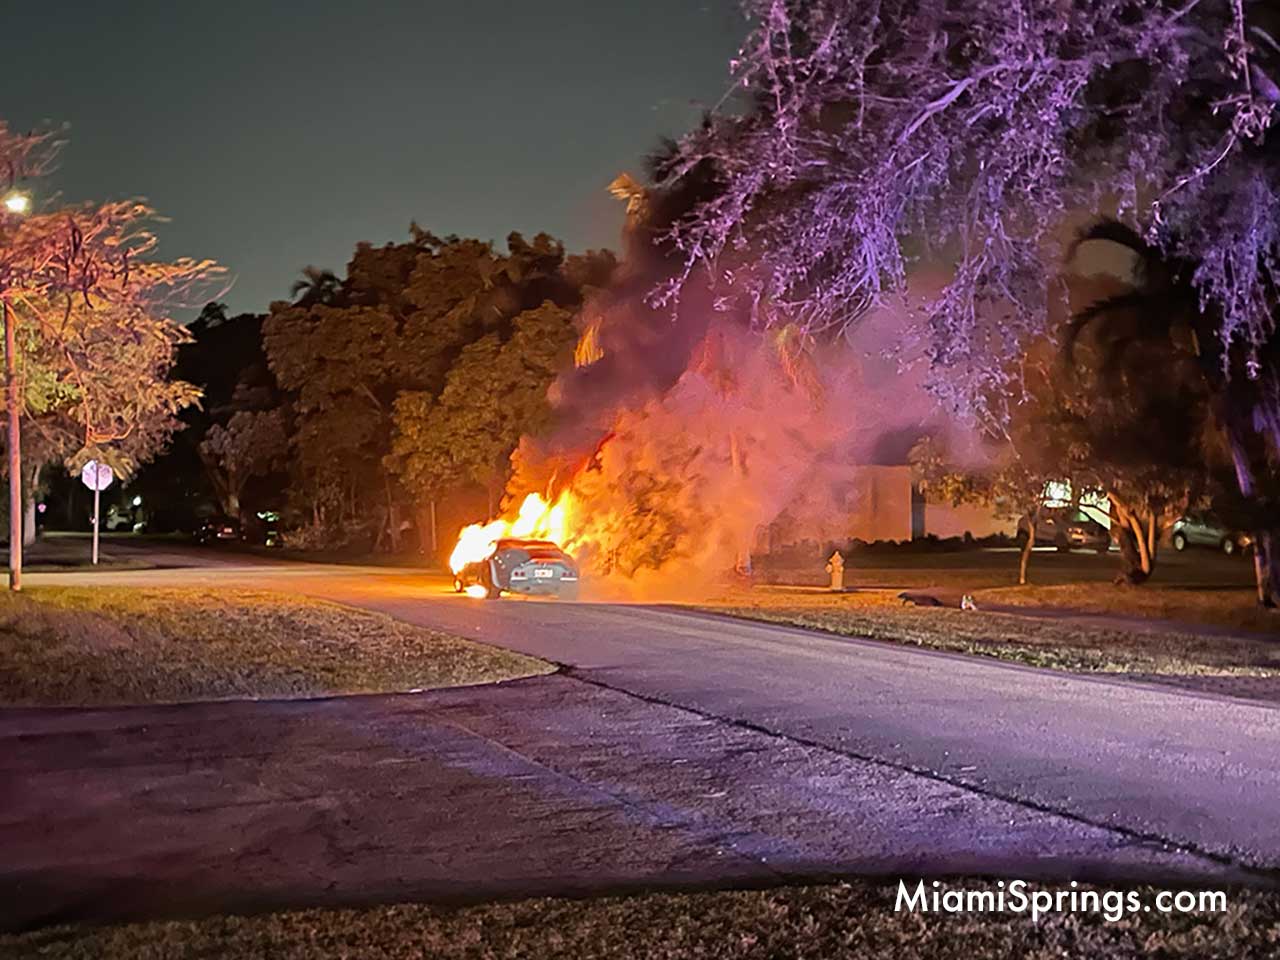 Marcos GT catches fire in Miami Springs